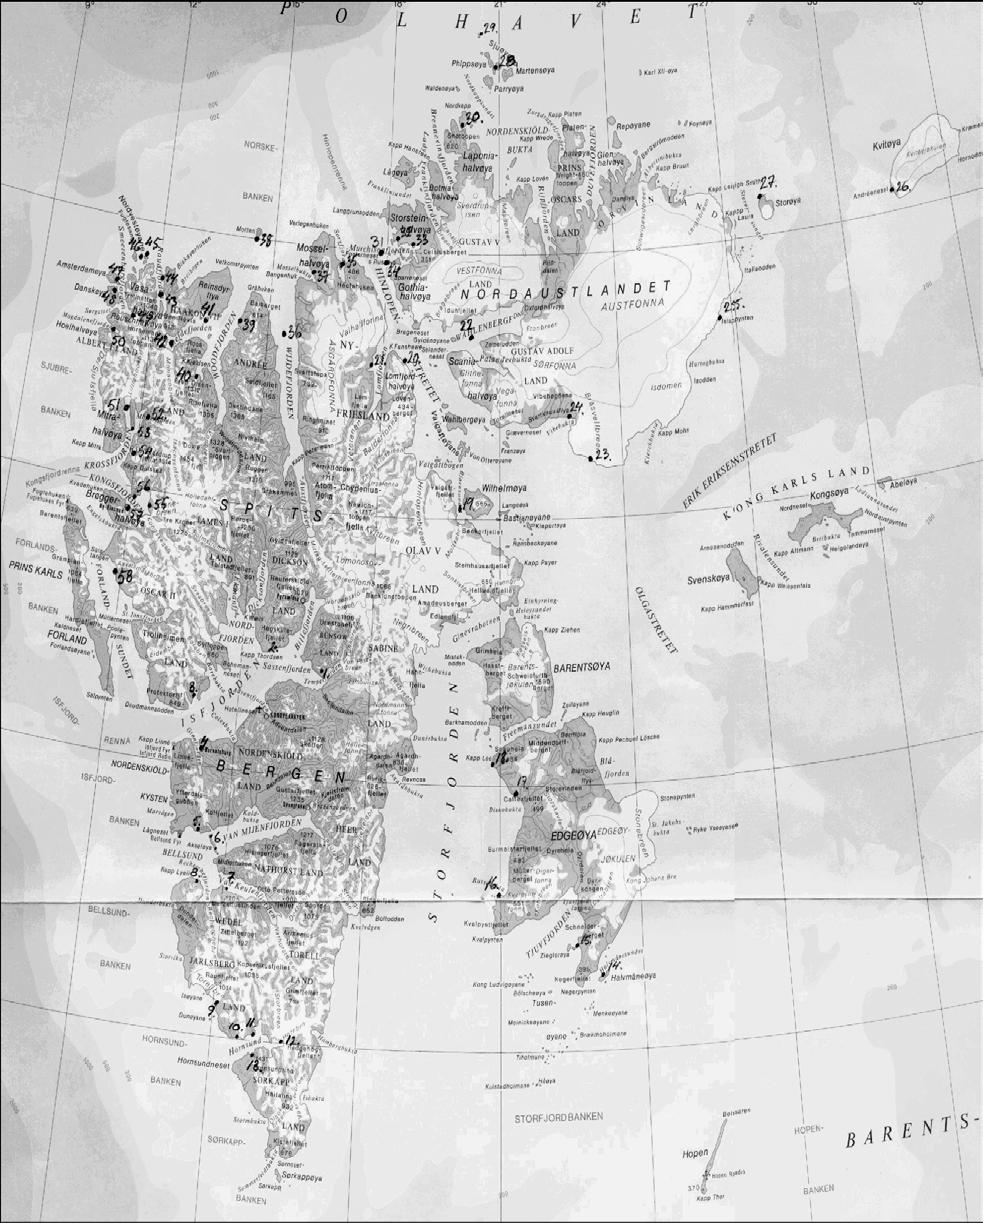 Map of Svalbard with possible landing locations.